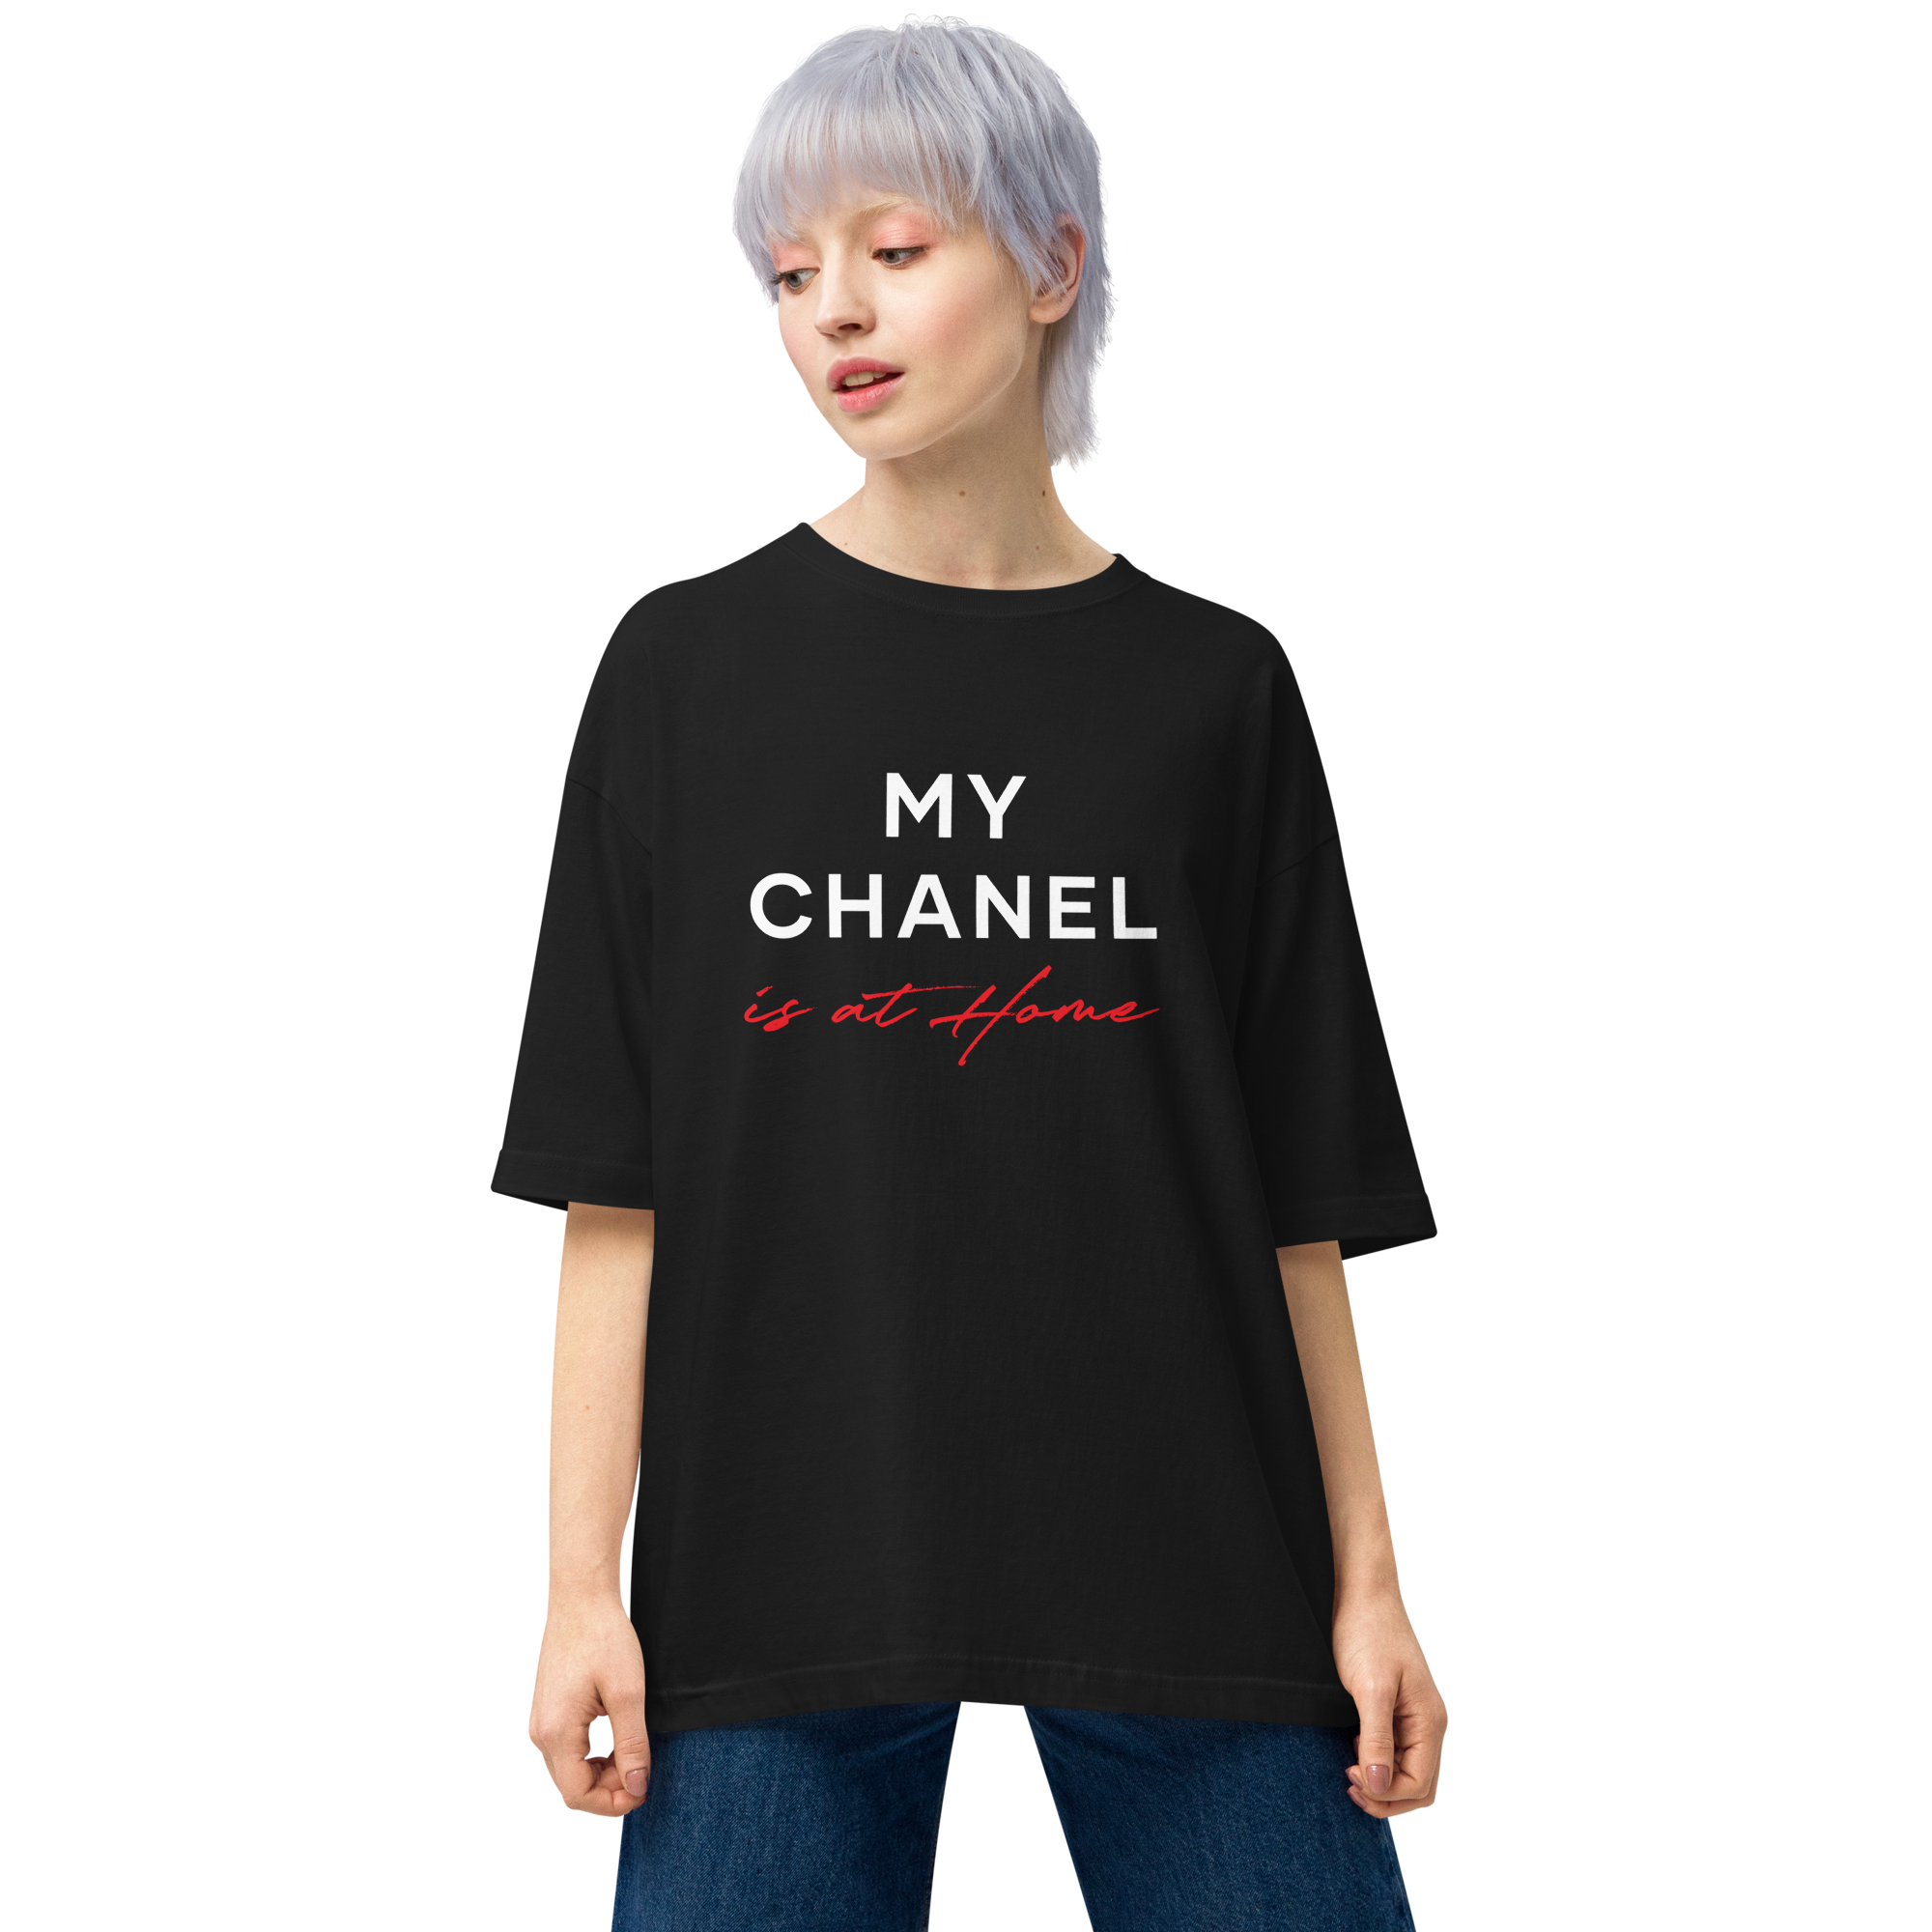 Design Express My Chanel Is at Home Unisex Oversized T-Shirt L